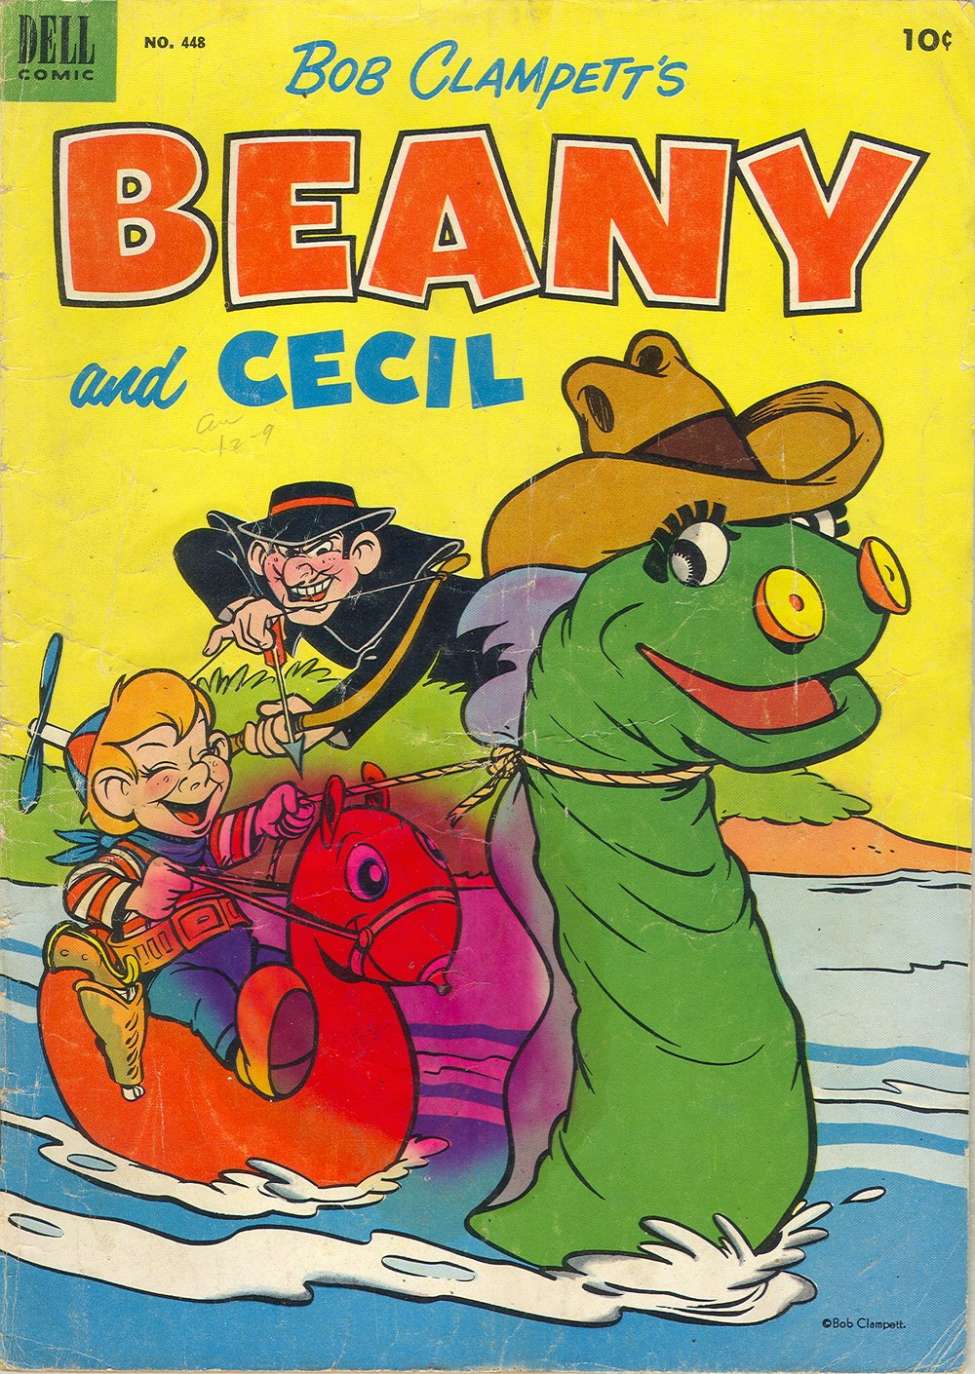 Comic Book Cover For 0448 - Beany and Cecil